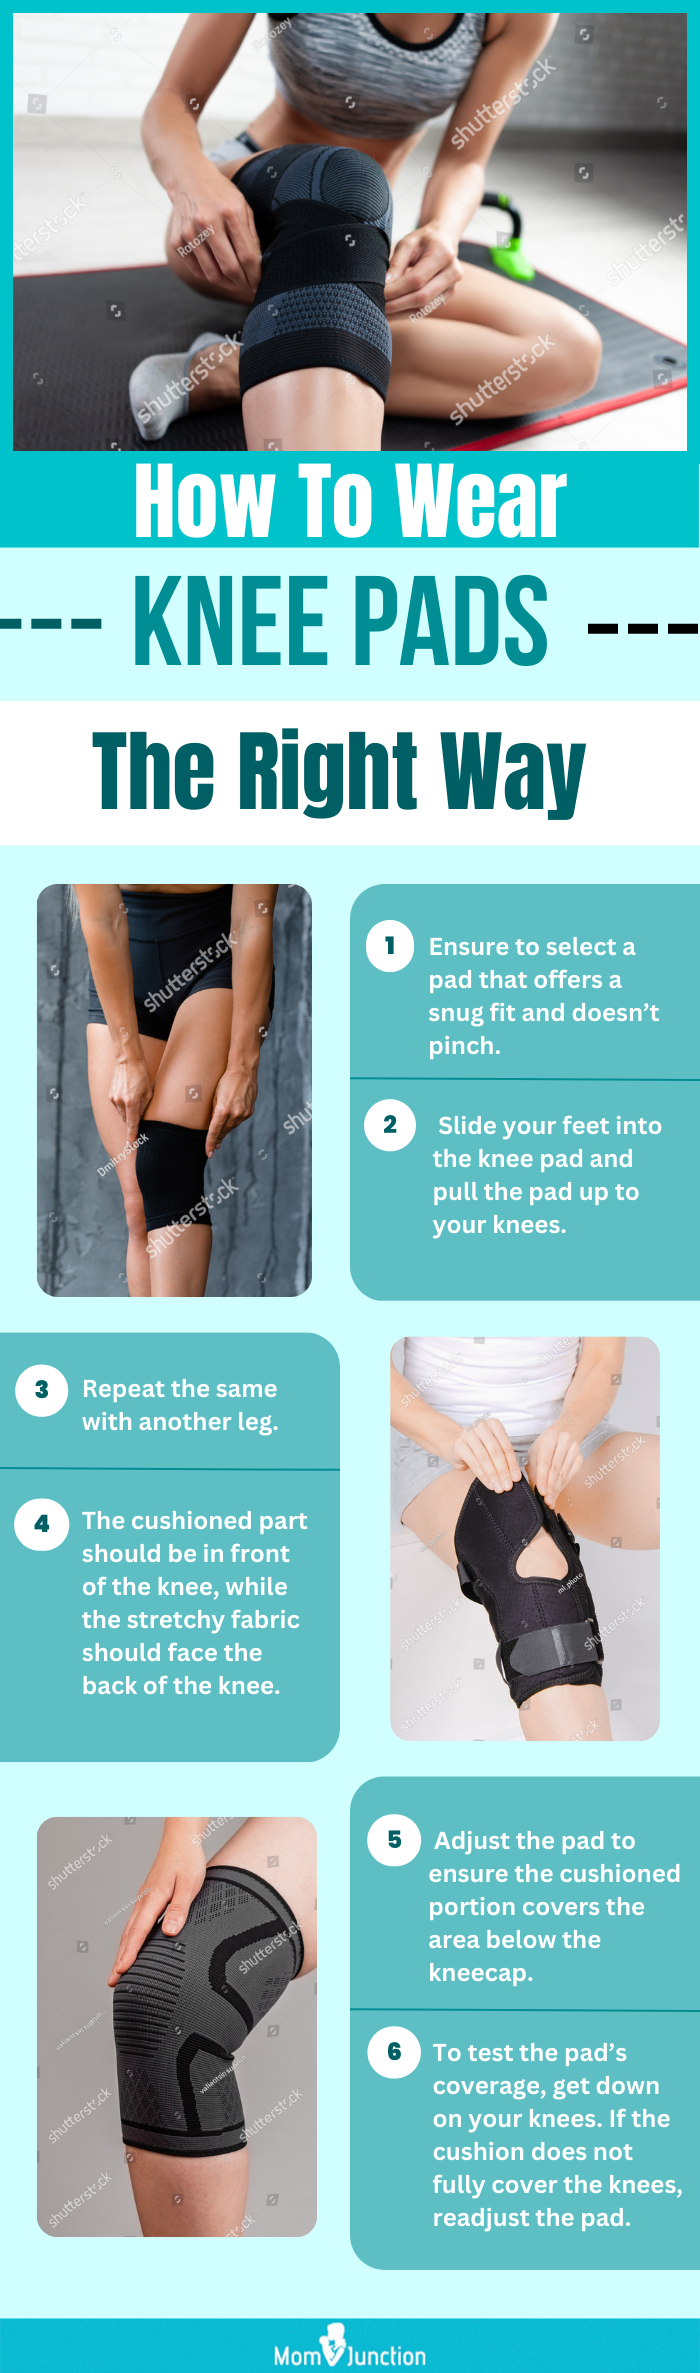 How To Wear Knee Pads The Right Way